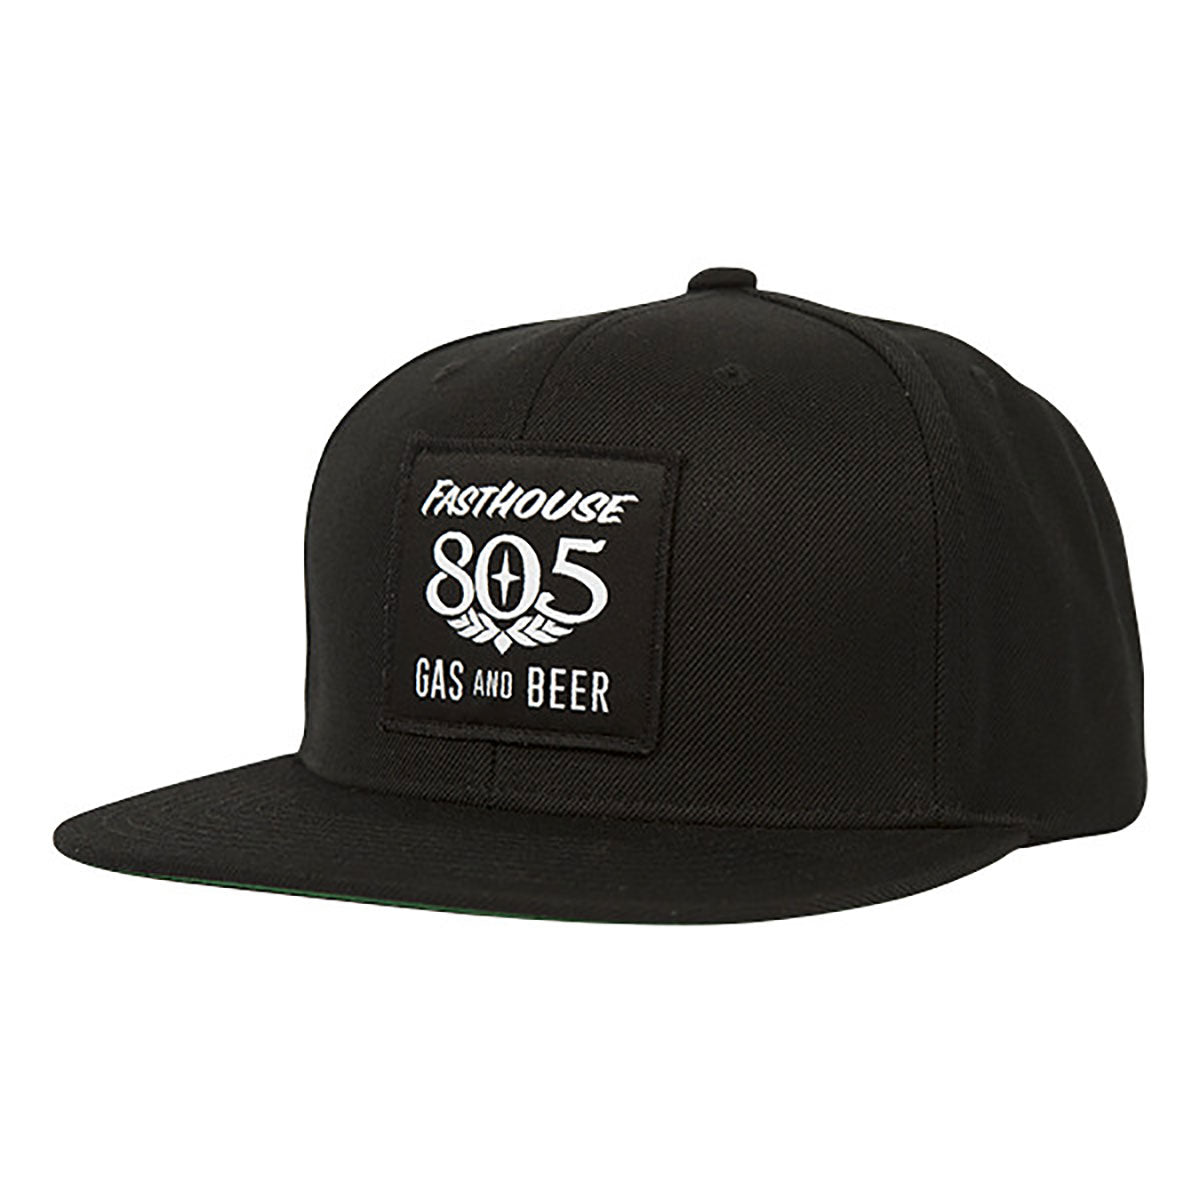 Fasthouse - 805 Hat - Black